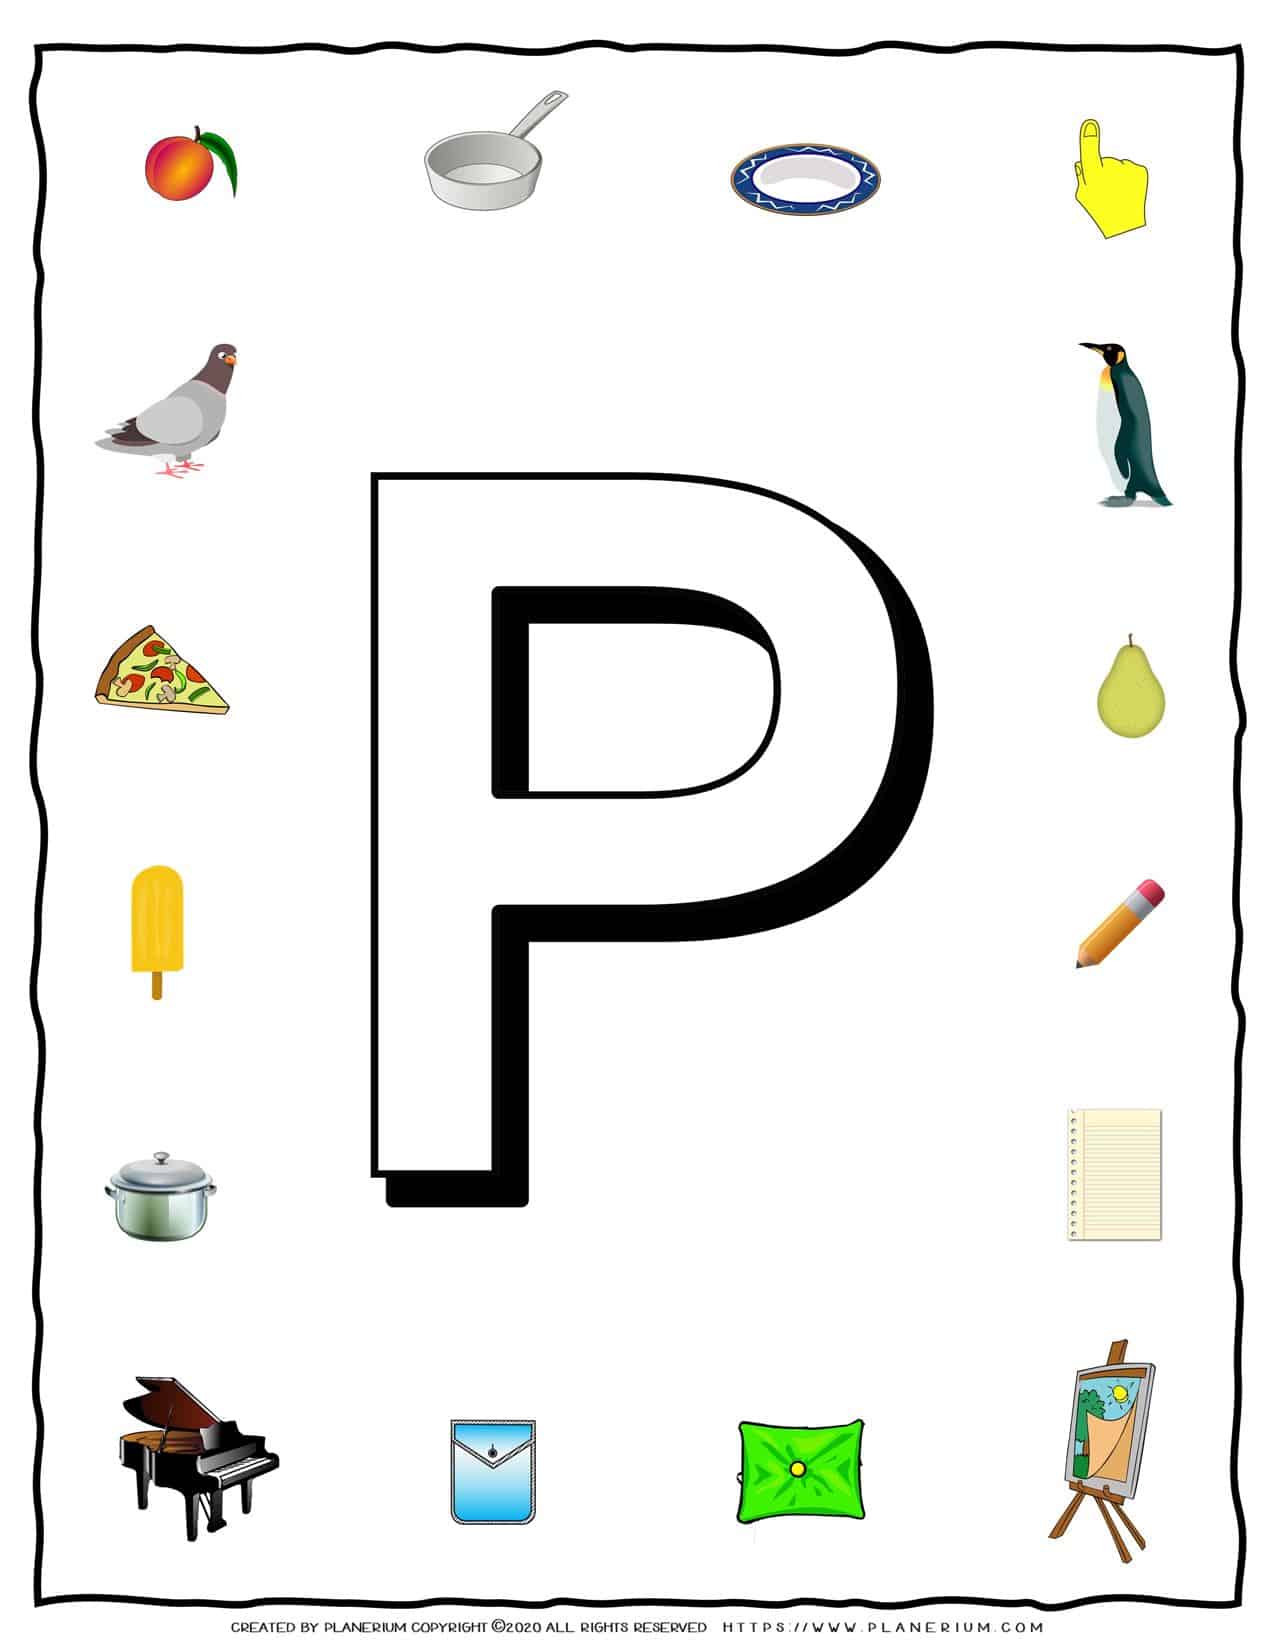 English Alphabet - Objects that starts with P | Planerium